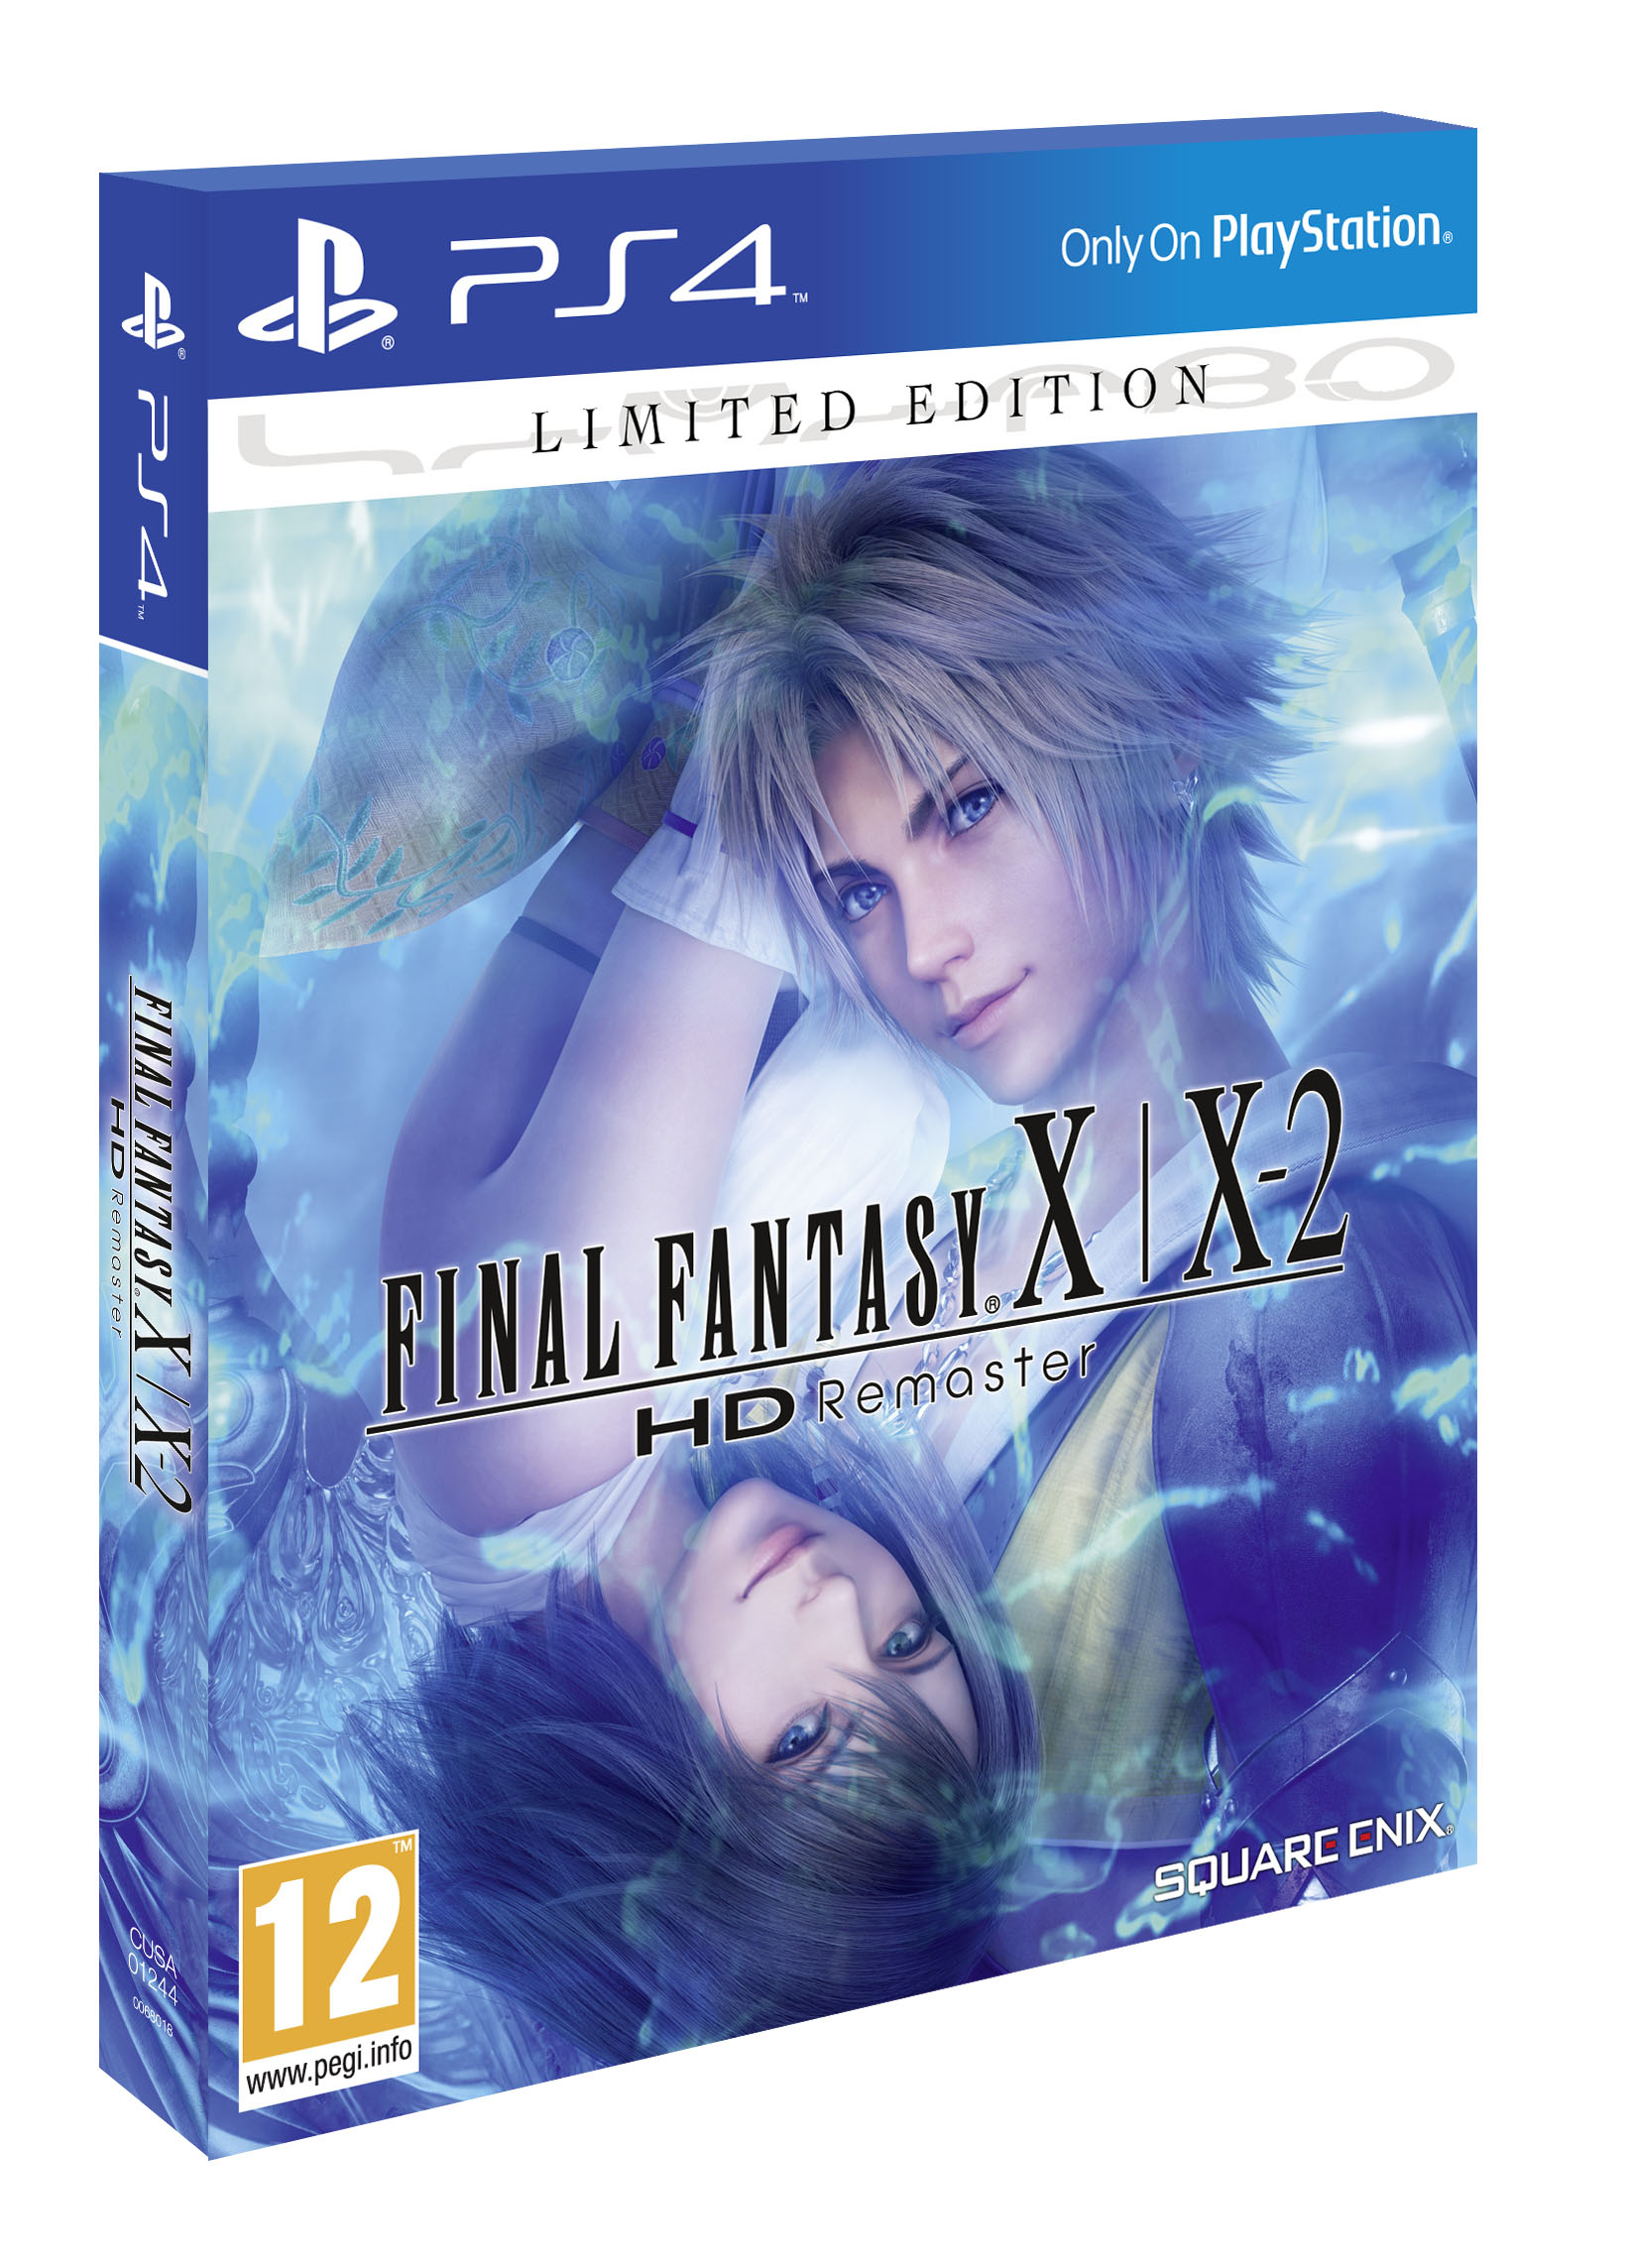 Final Fantasy X/X-2 HD Remaster -- Limited Edition (Sony PlayStation 4,  2015) for sale online